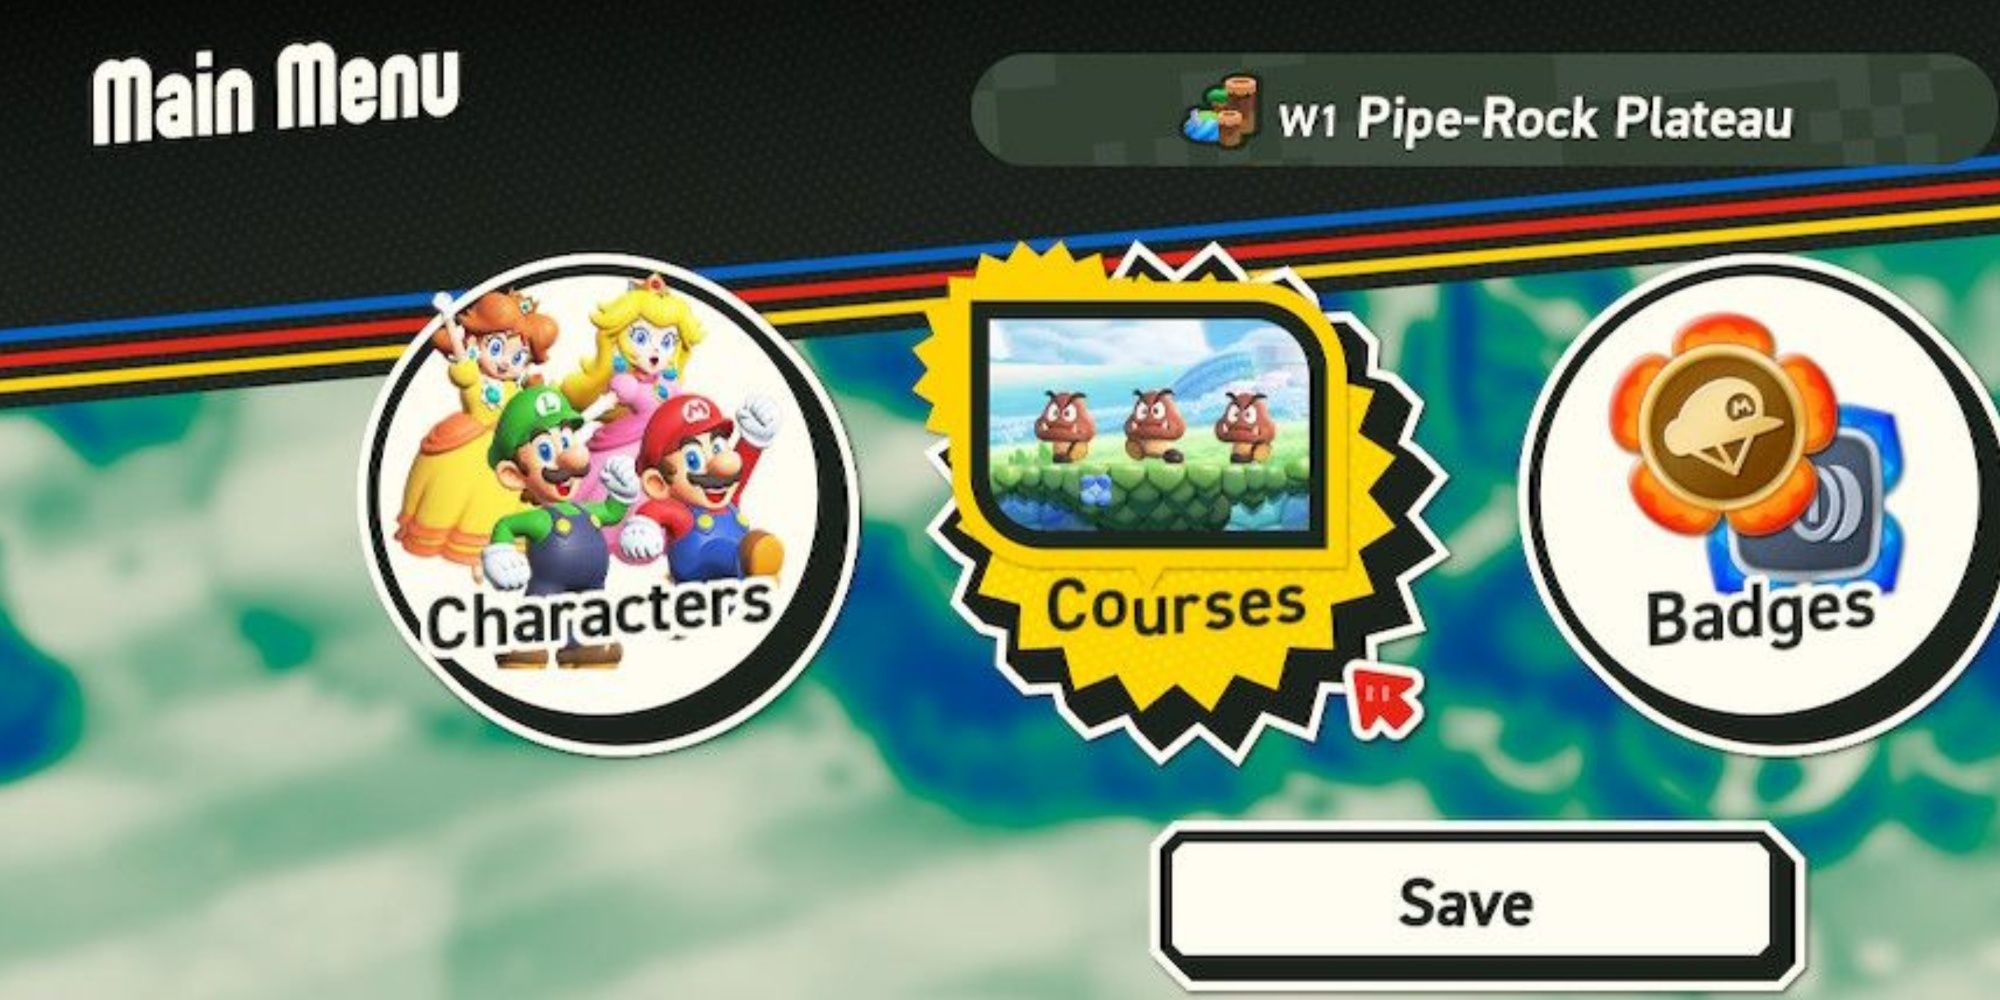 opening courses section from main menu